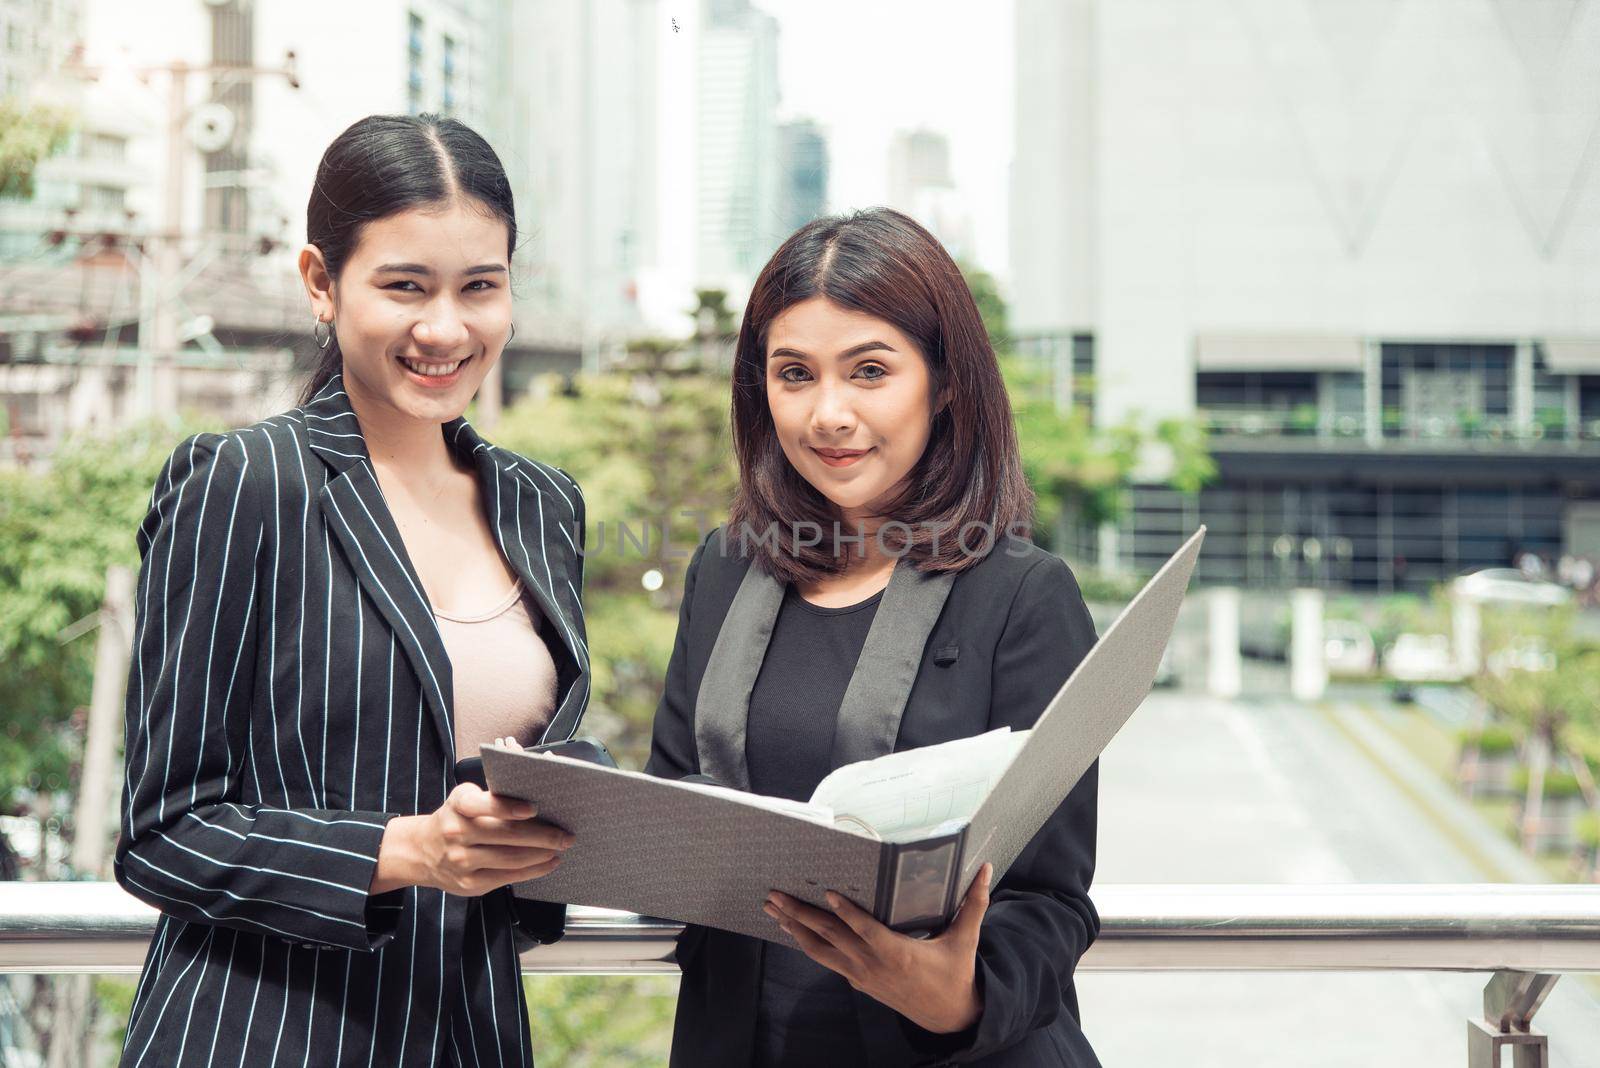 Two young Asian businesswomen looking into document file folder for analyzing profit or sale break even point after marketing. Business teamwork employees of lifestyle working women concept.